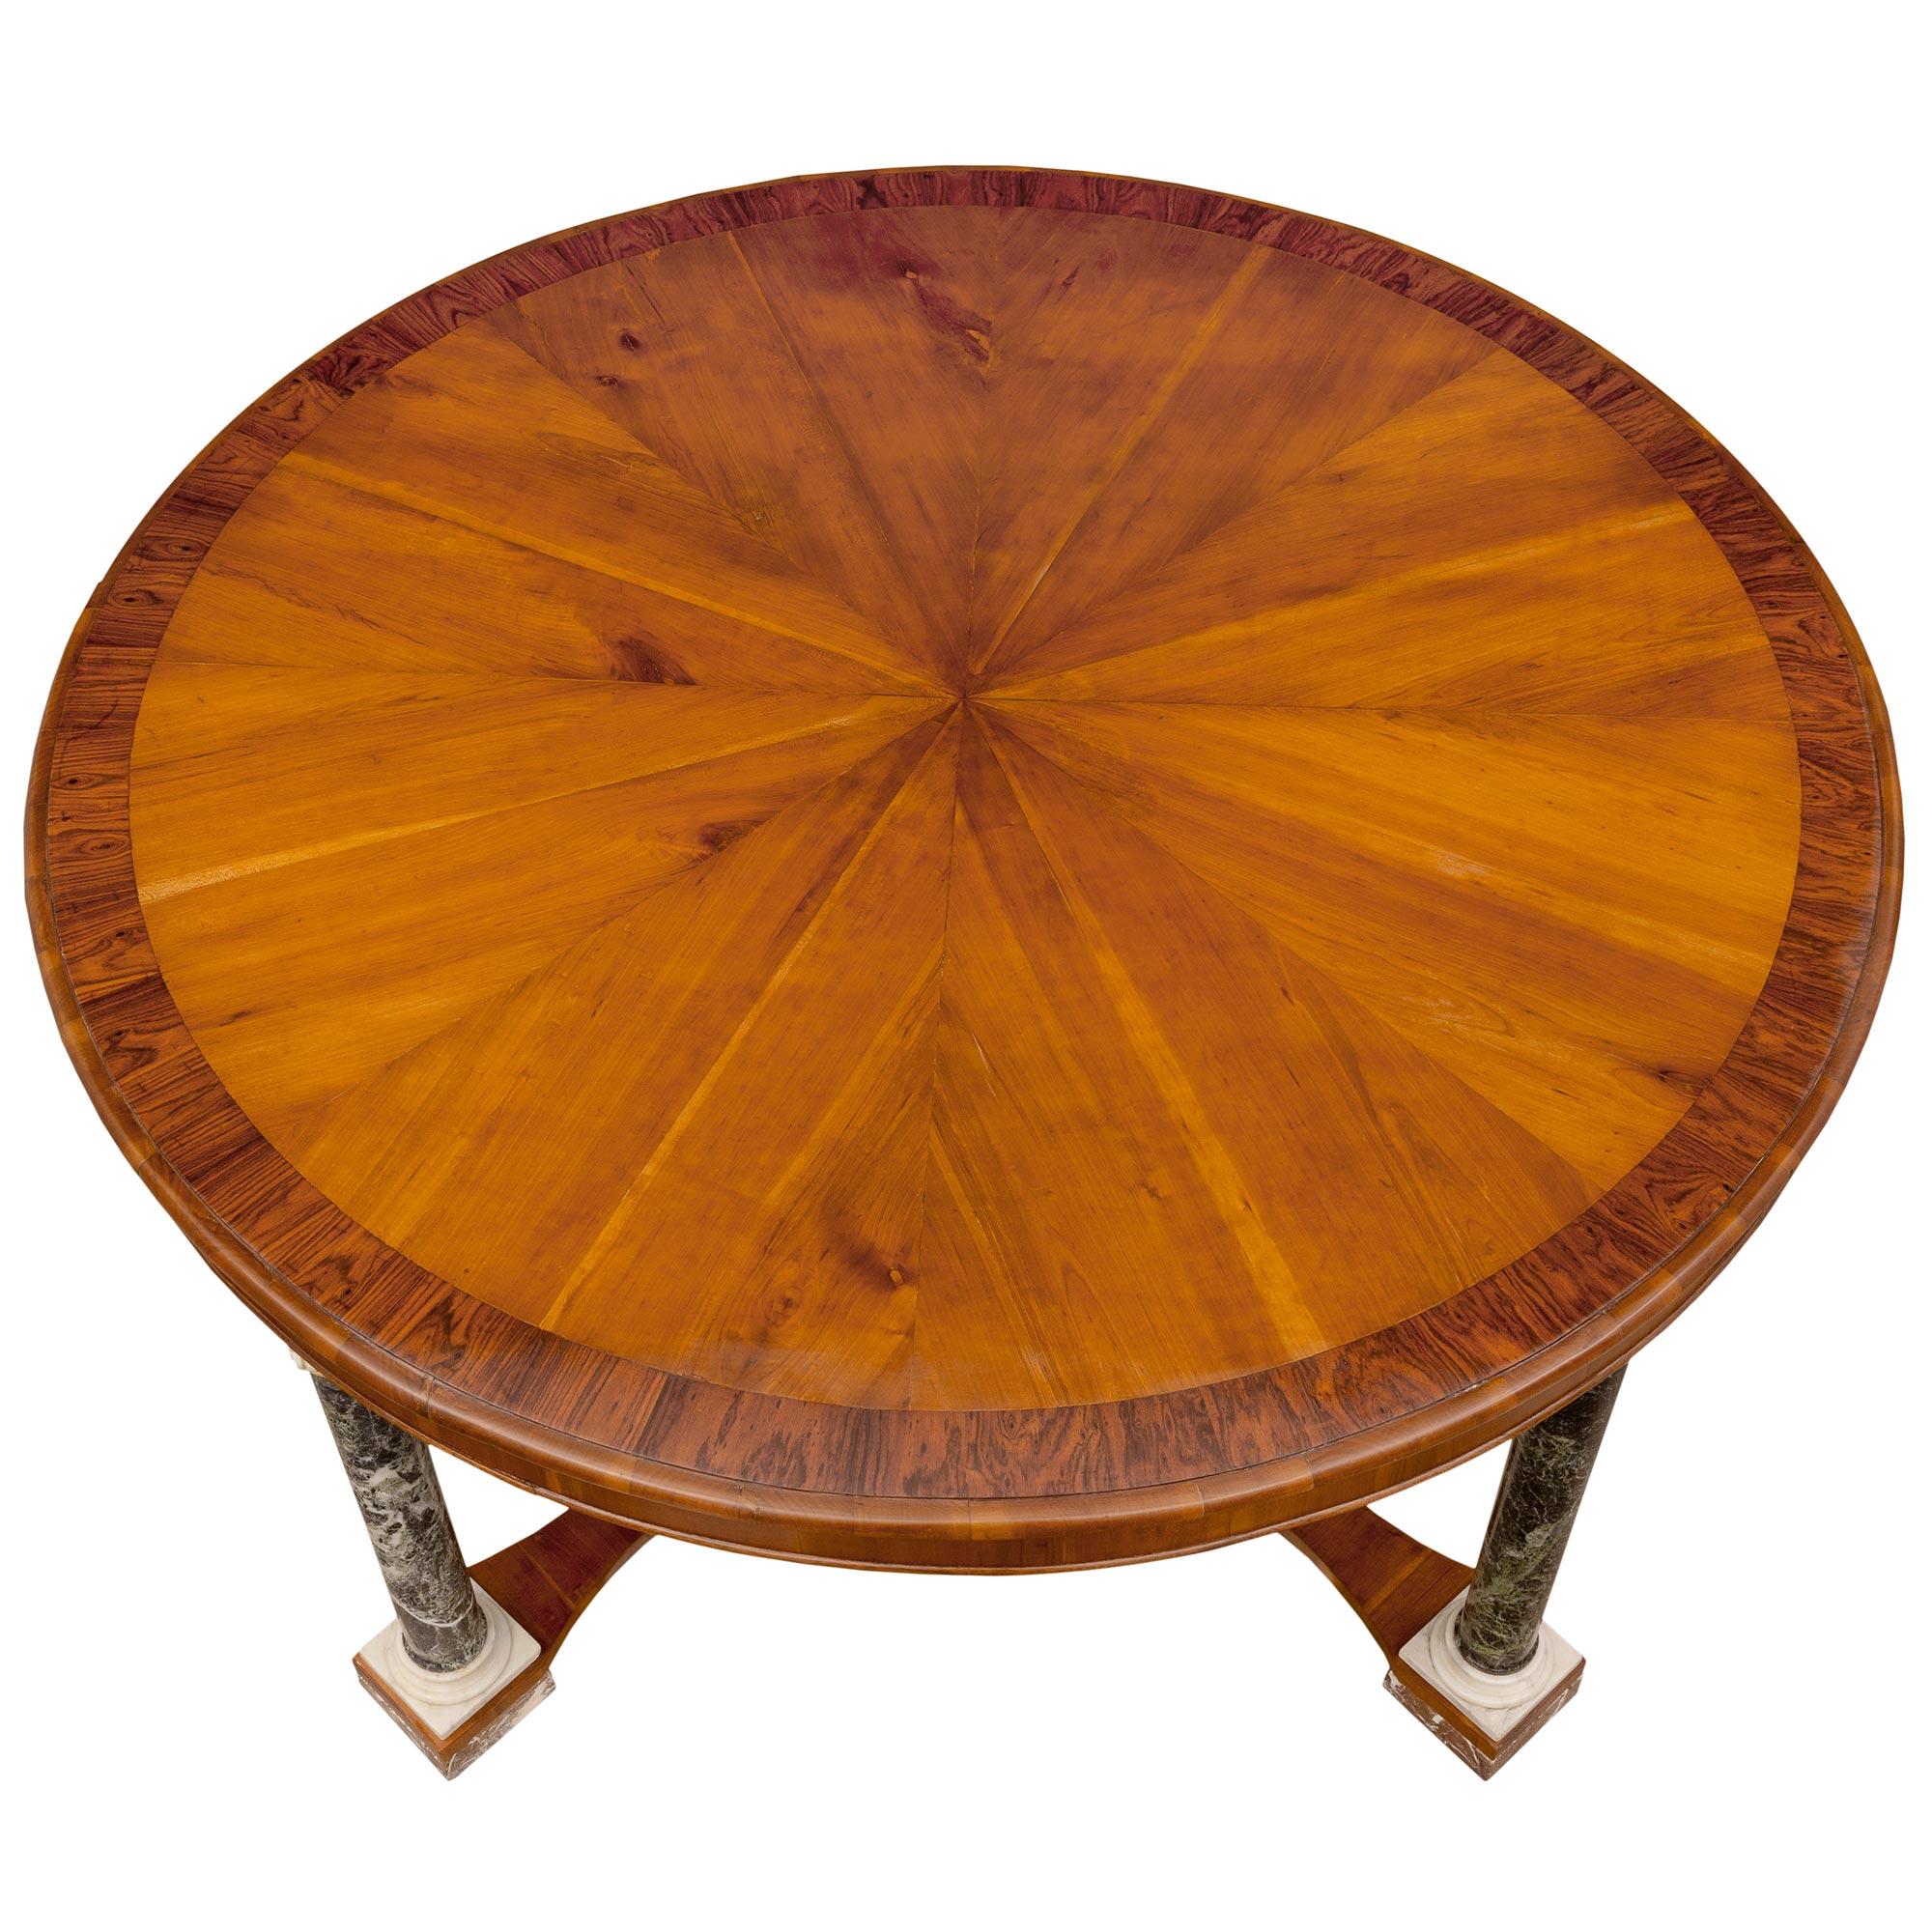 A most impressive and large scale Italian early 19th century neo-classical st. walnut, rosewood white carrara, Vert Maurin and Rose Vif des Pyrénées marble center table. The striking circular table is raised by fine Rose Vif des Pyrénées marble